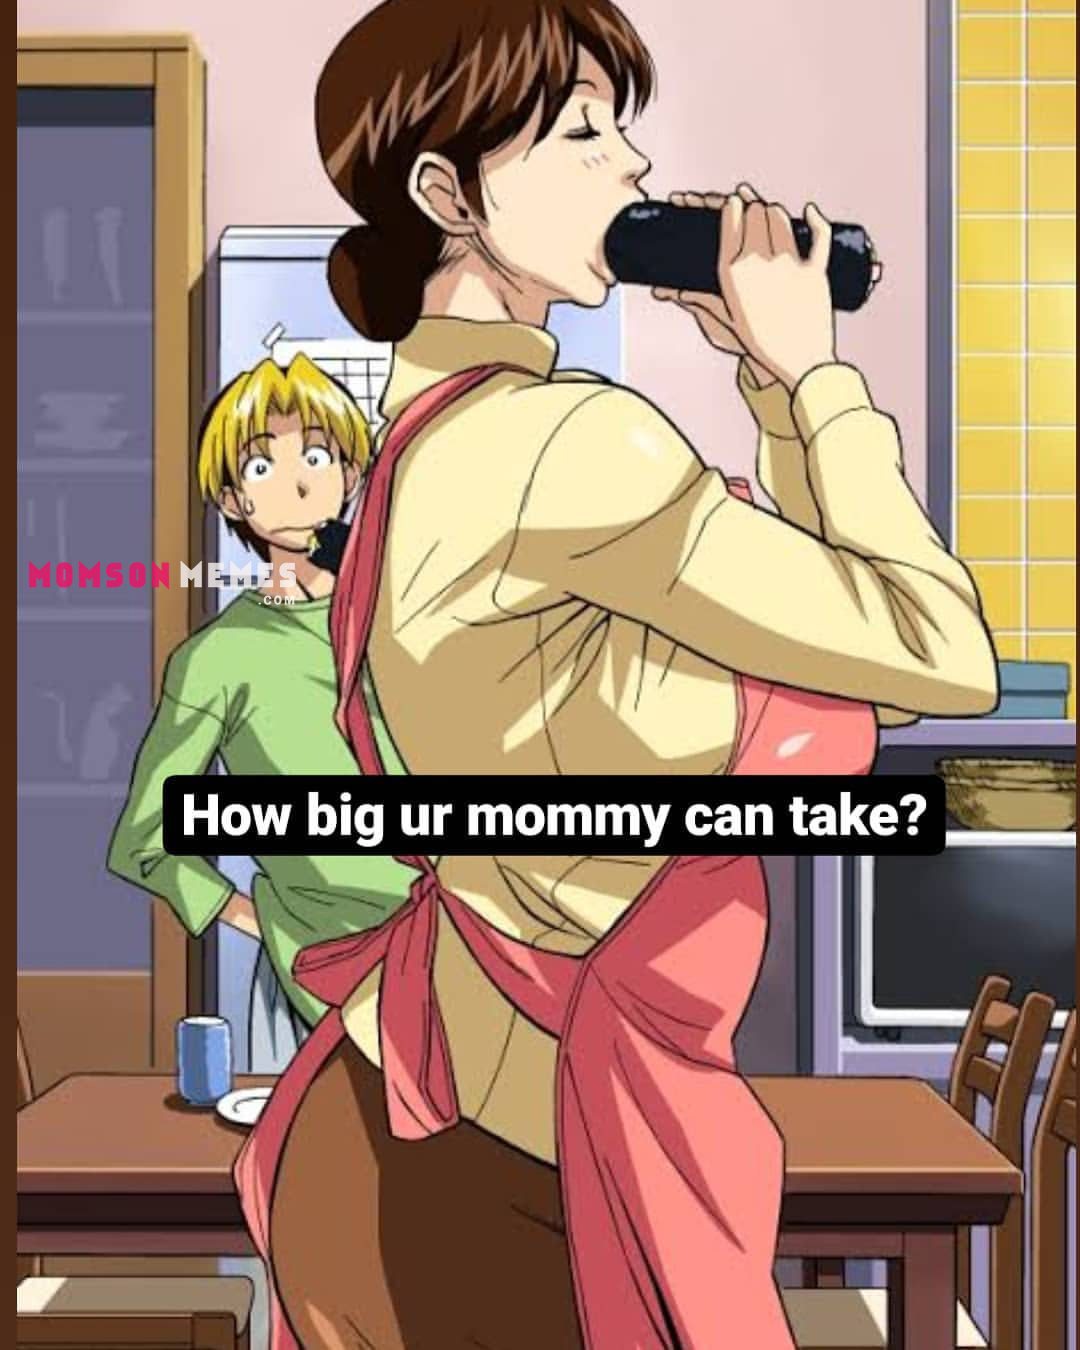 How big your mommy can take? Comment below! guys.